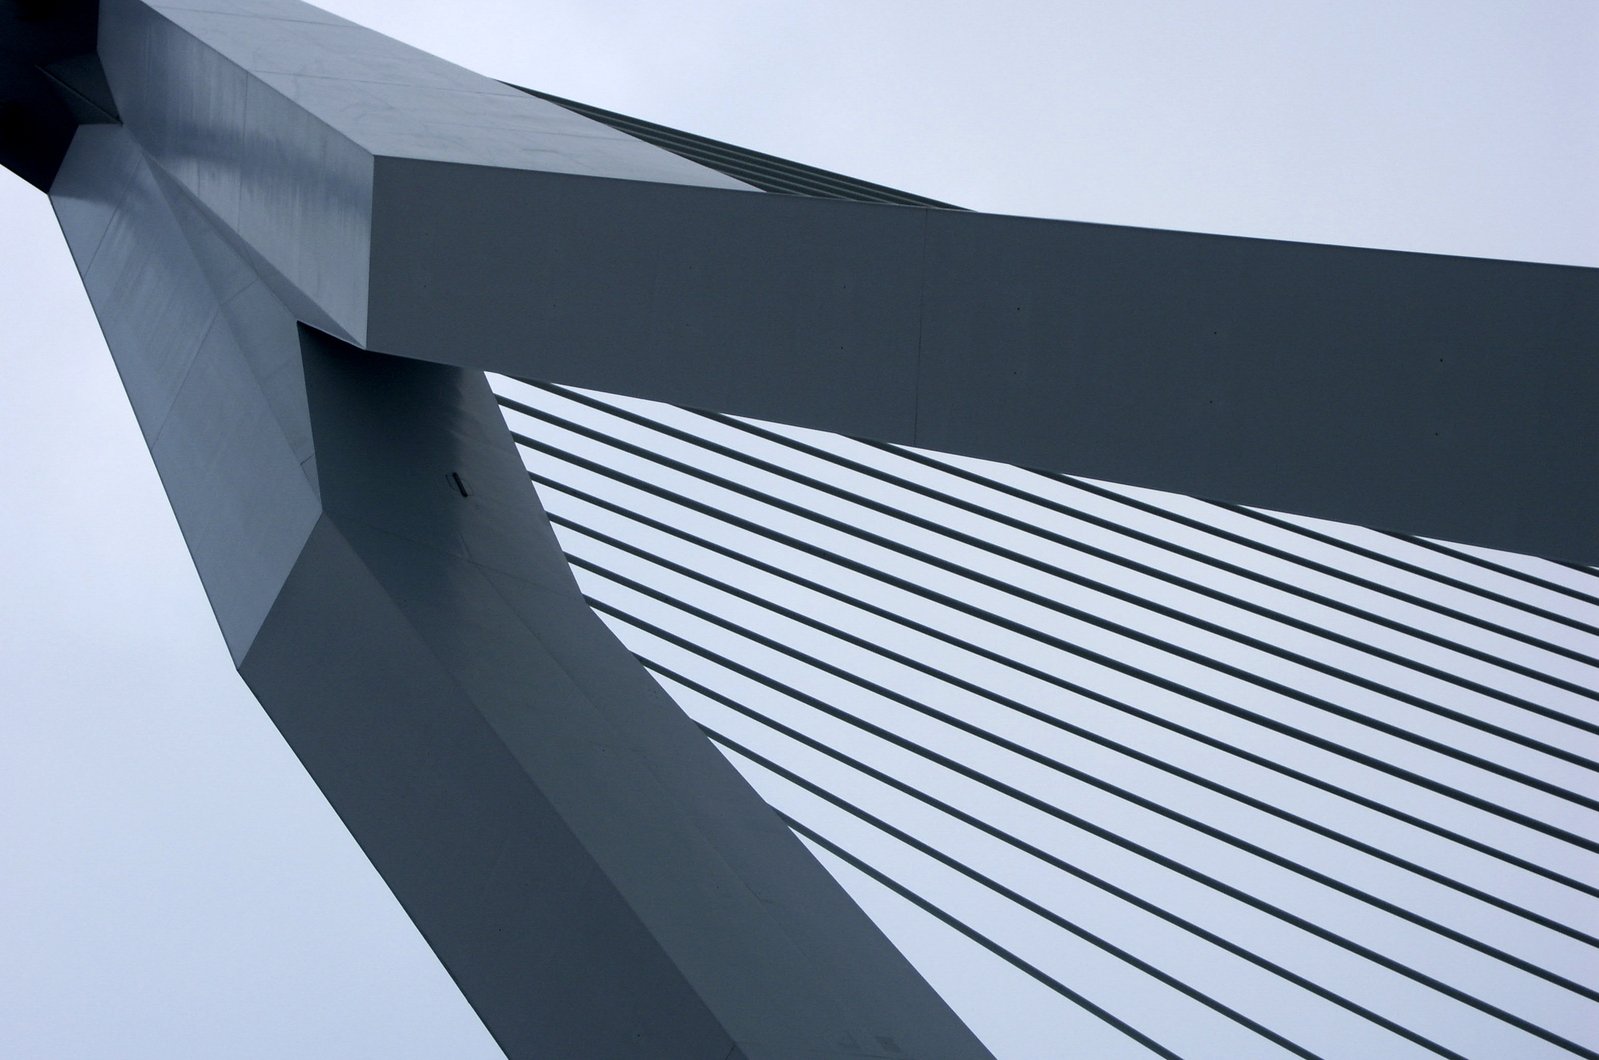 an abstract view of a bridge over looking a plane